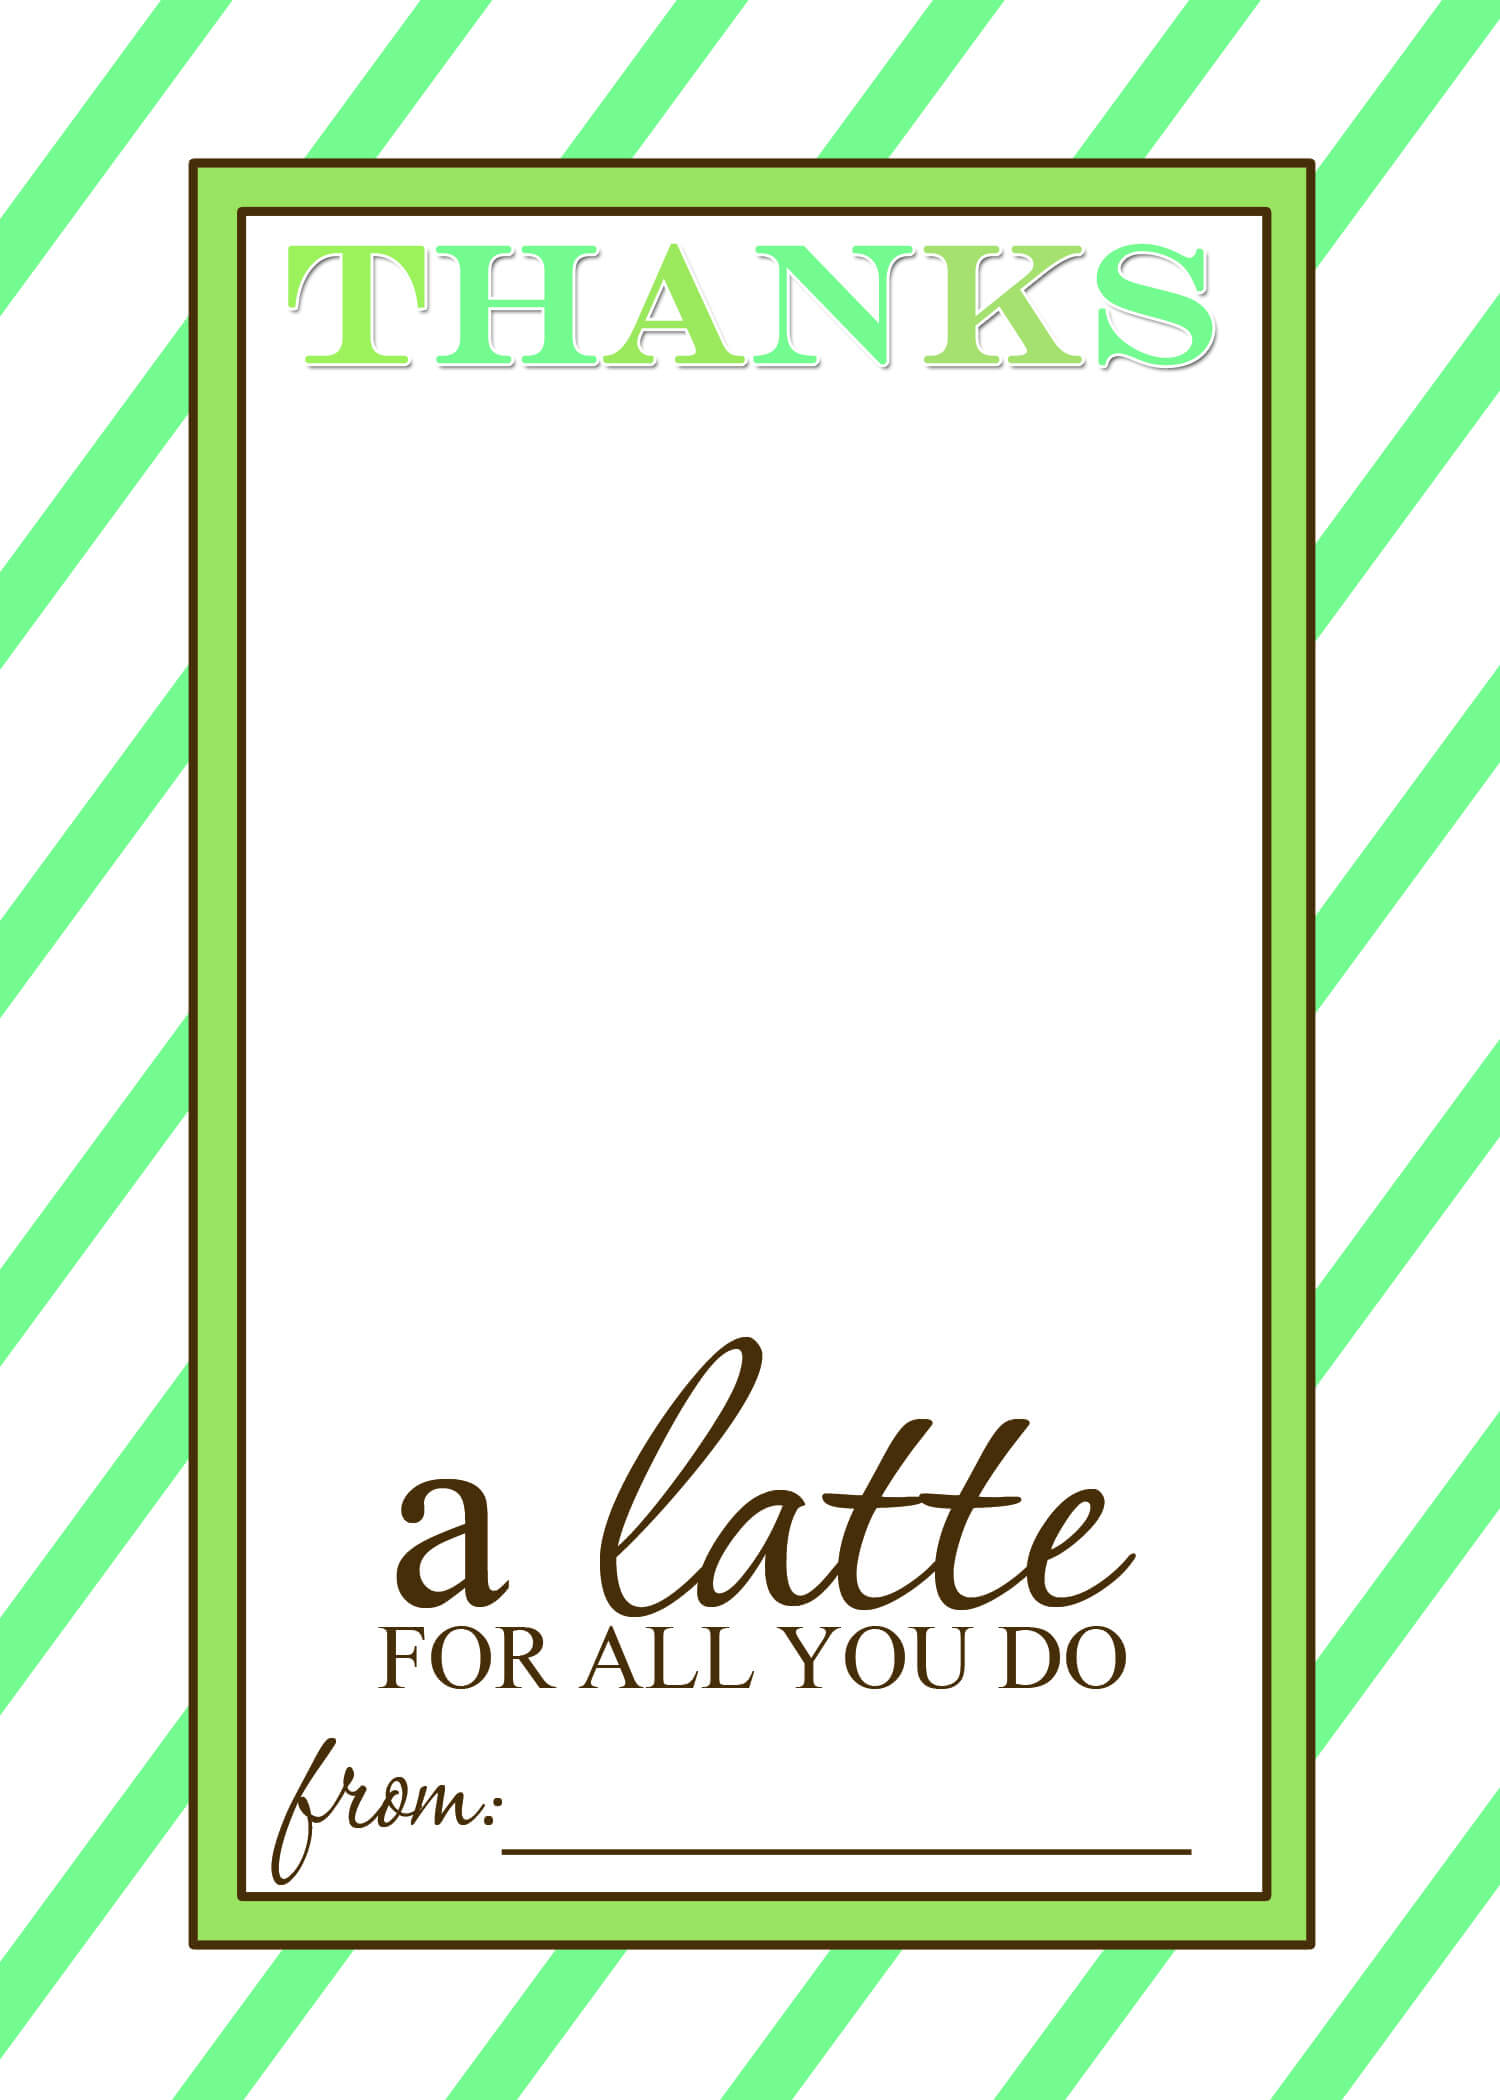 That's Country Living For Thanks A Latte Card Template